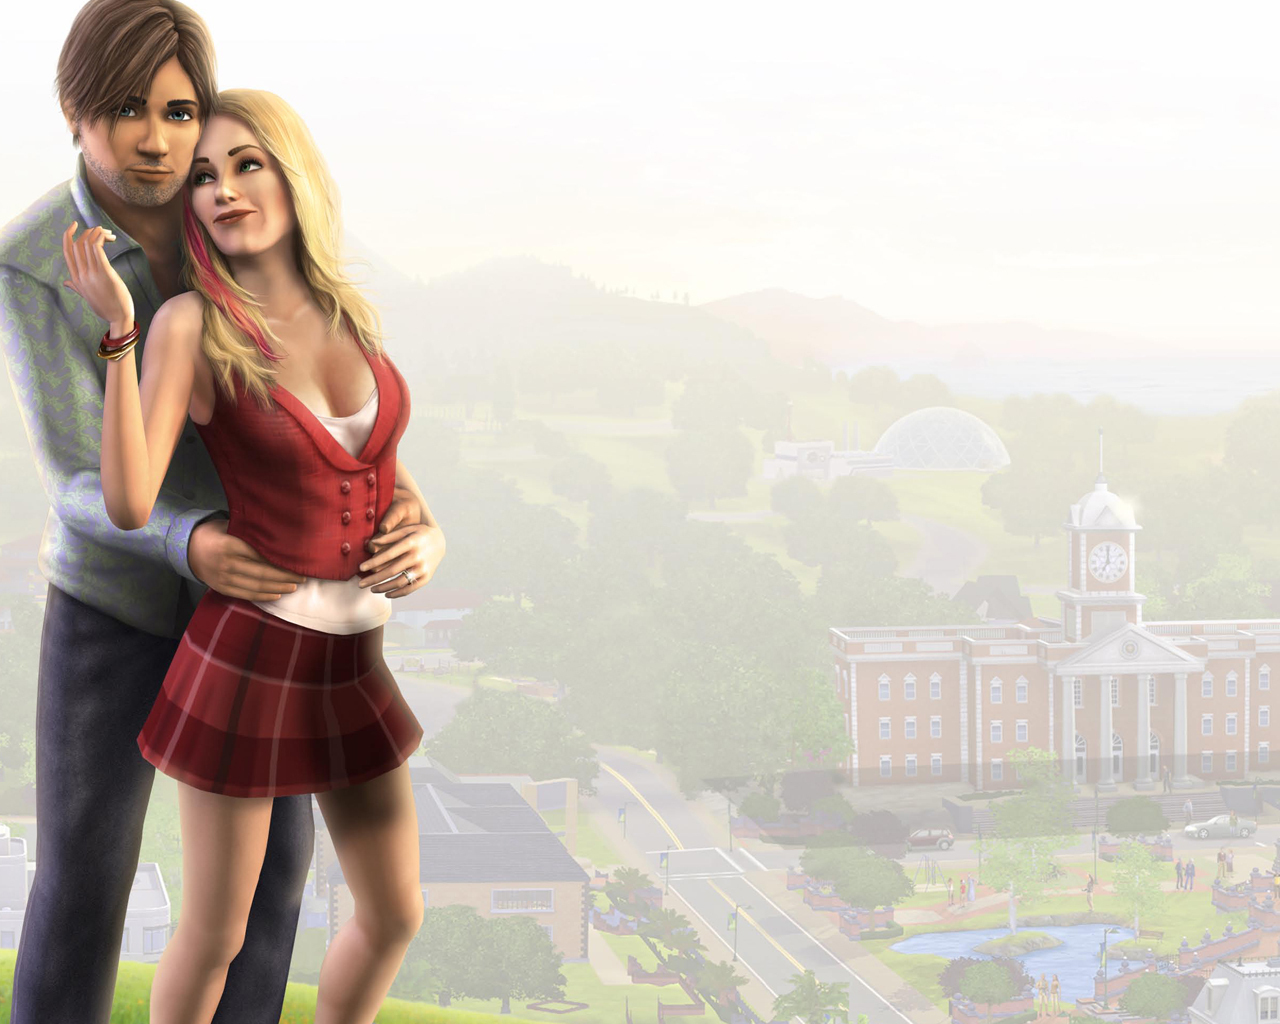 The Sims 3 Wallpapers 1